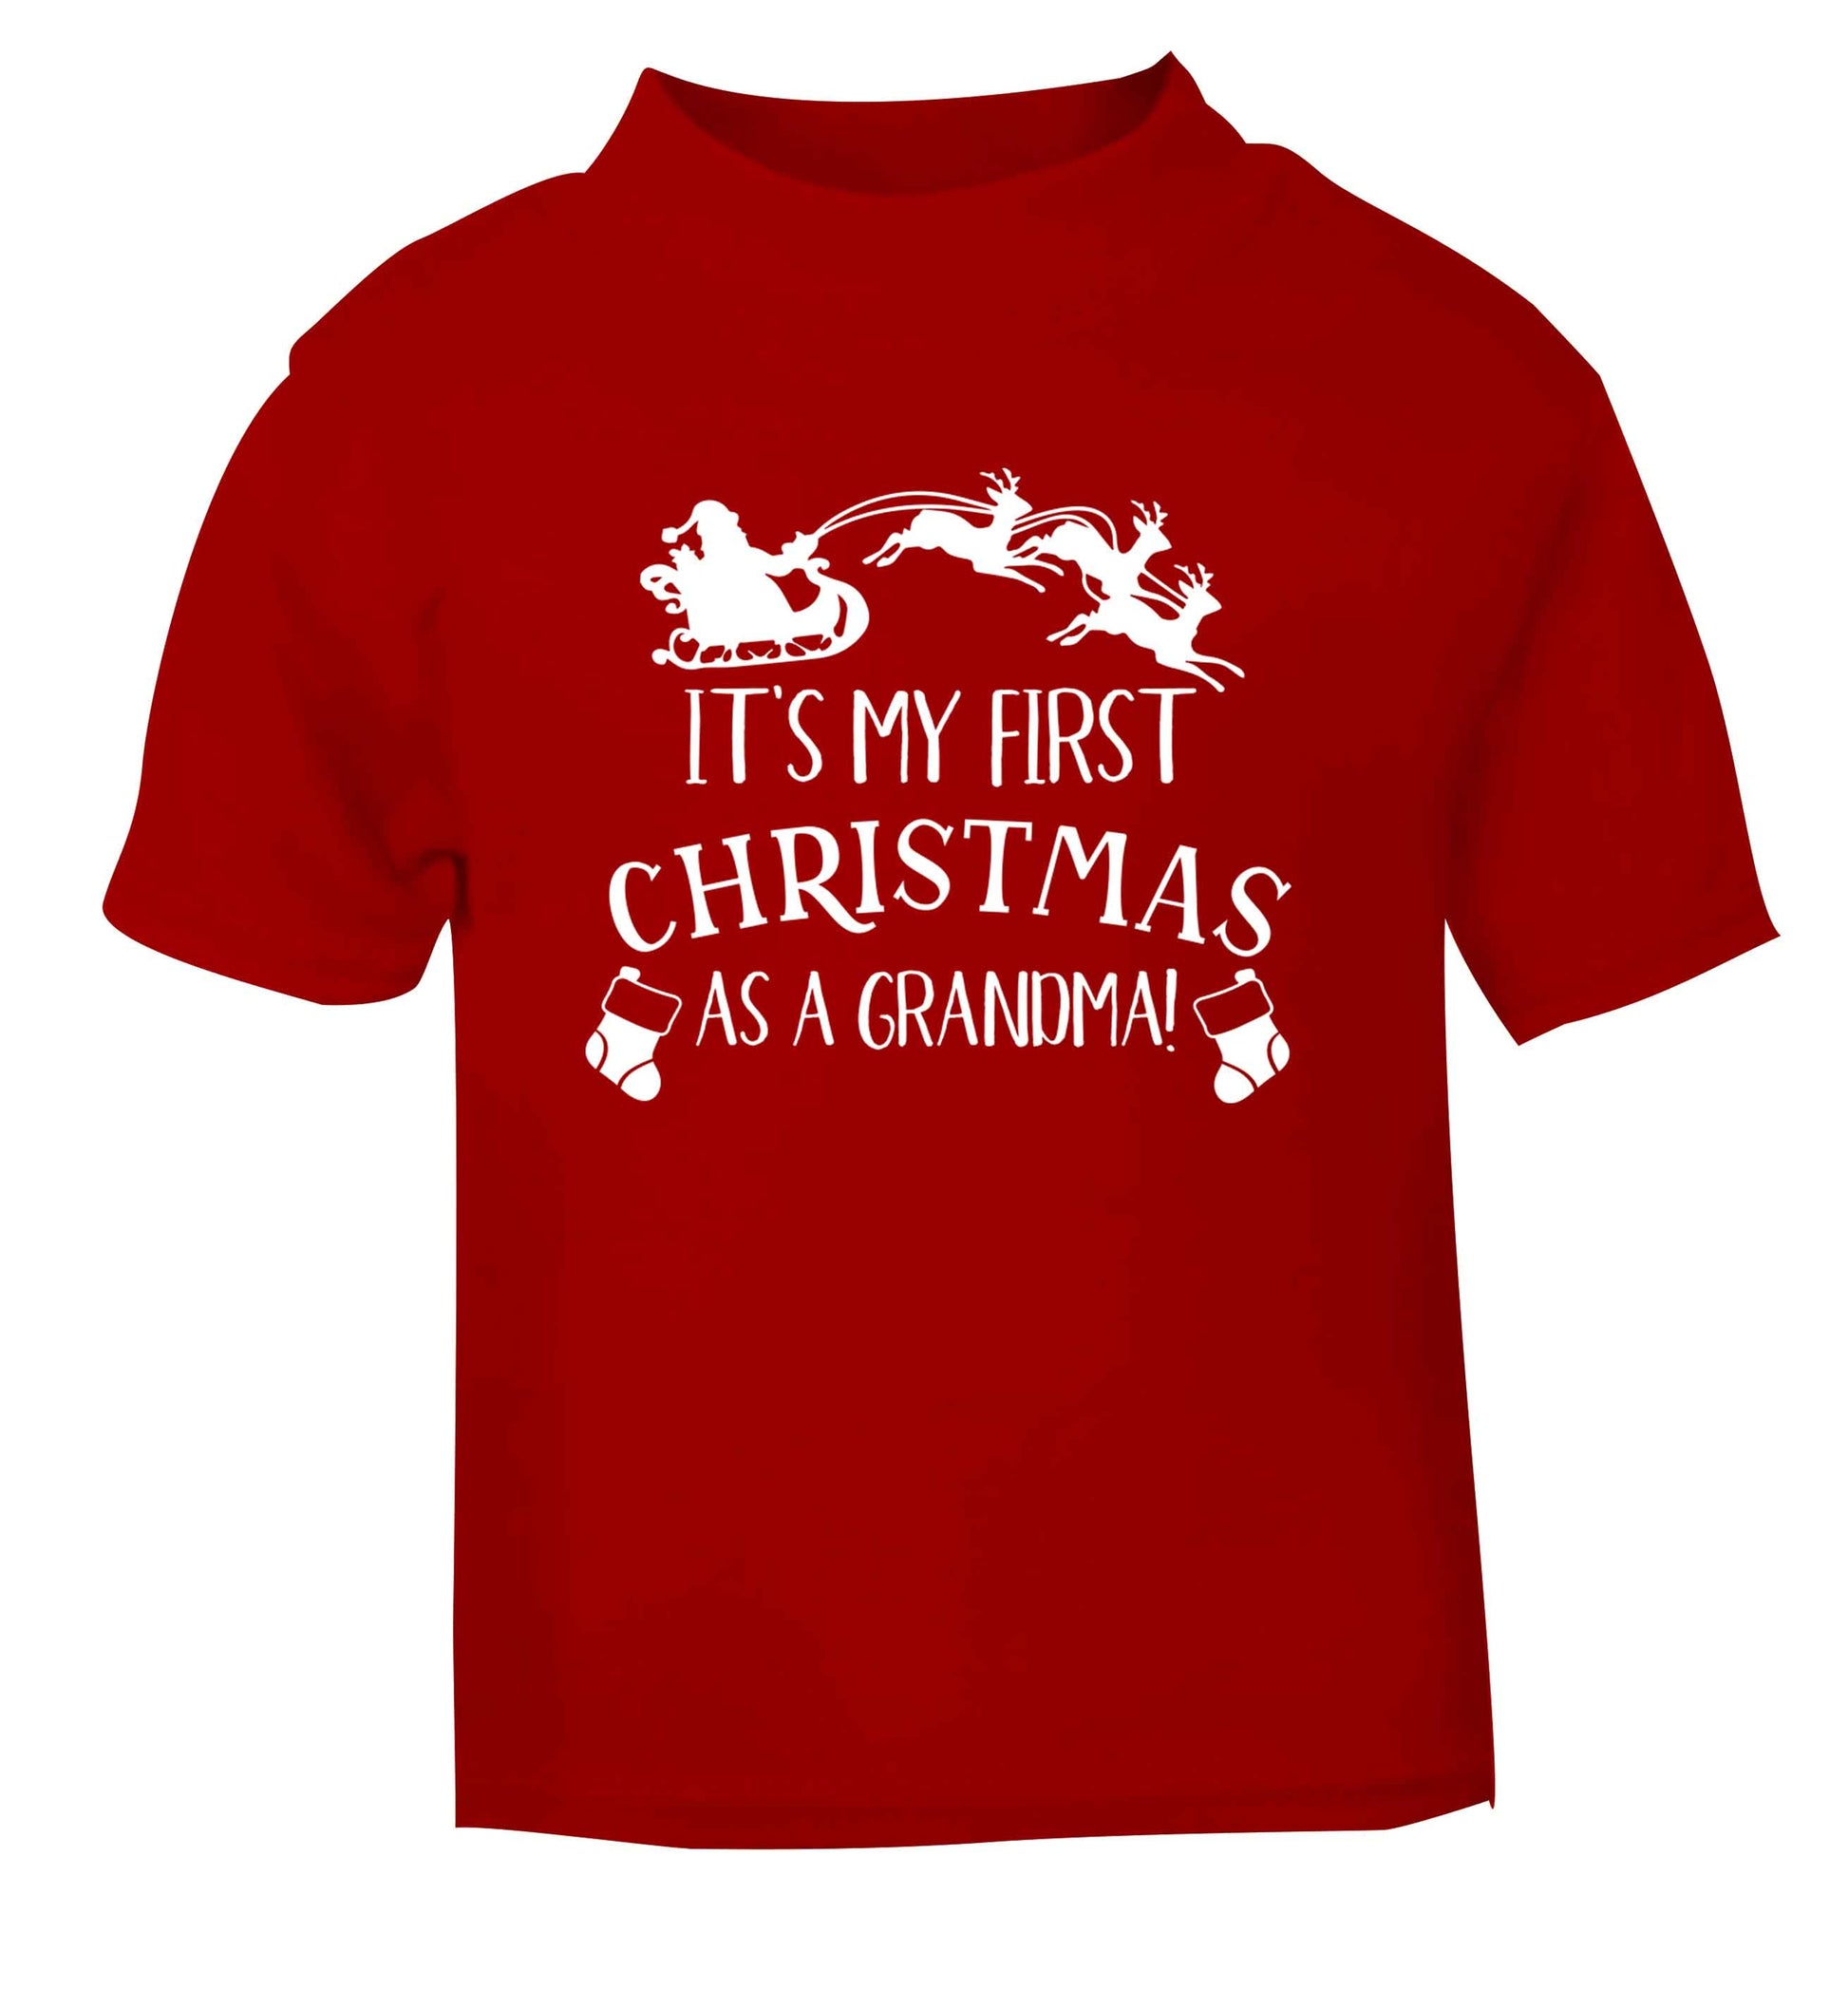 It's my first Christmas as a grandma! red Baby Toddler Tshirt 2 Years